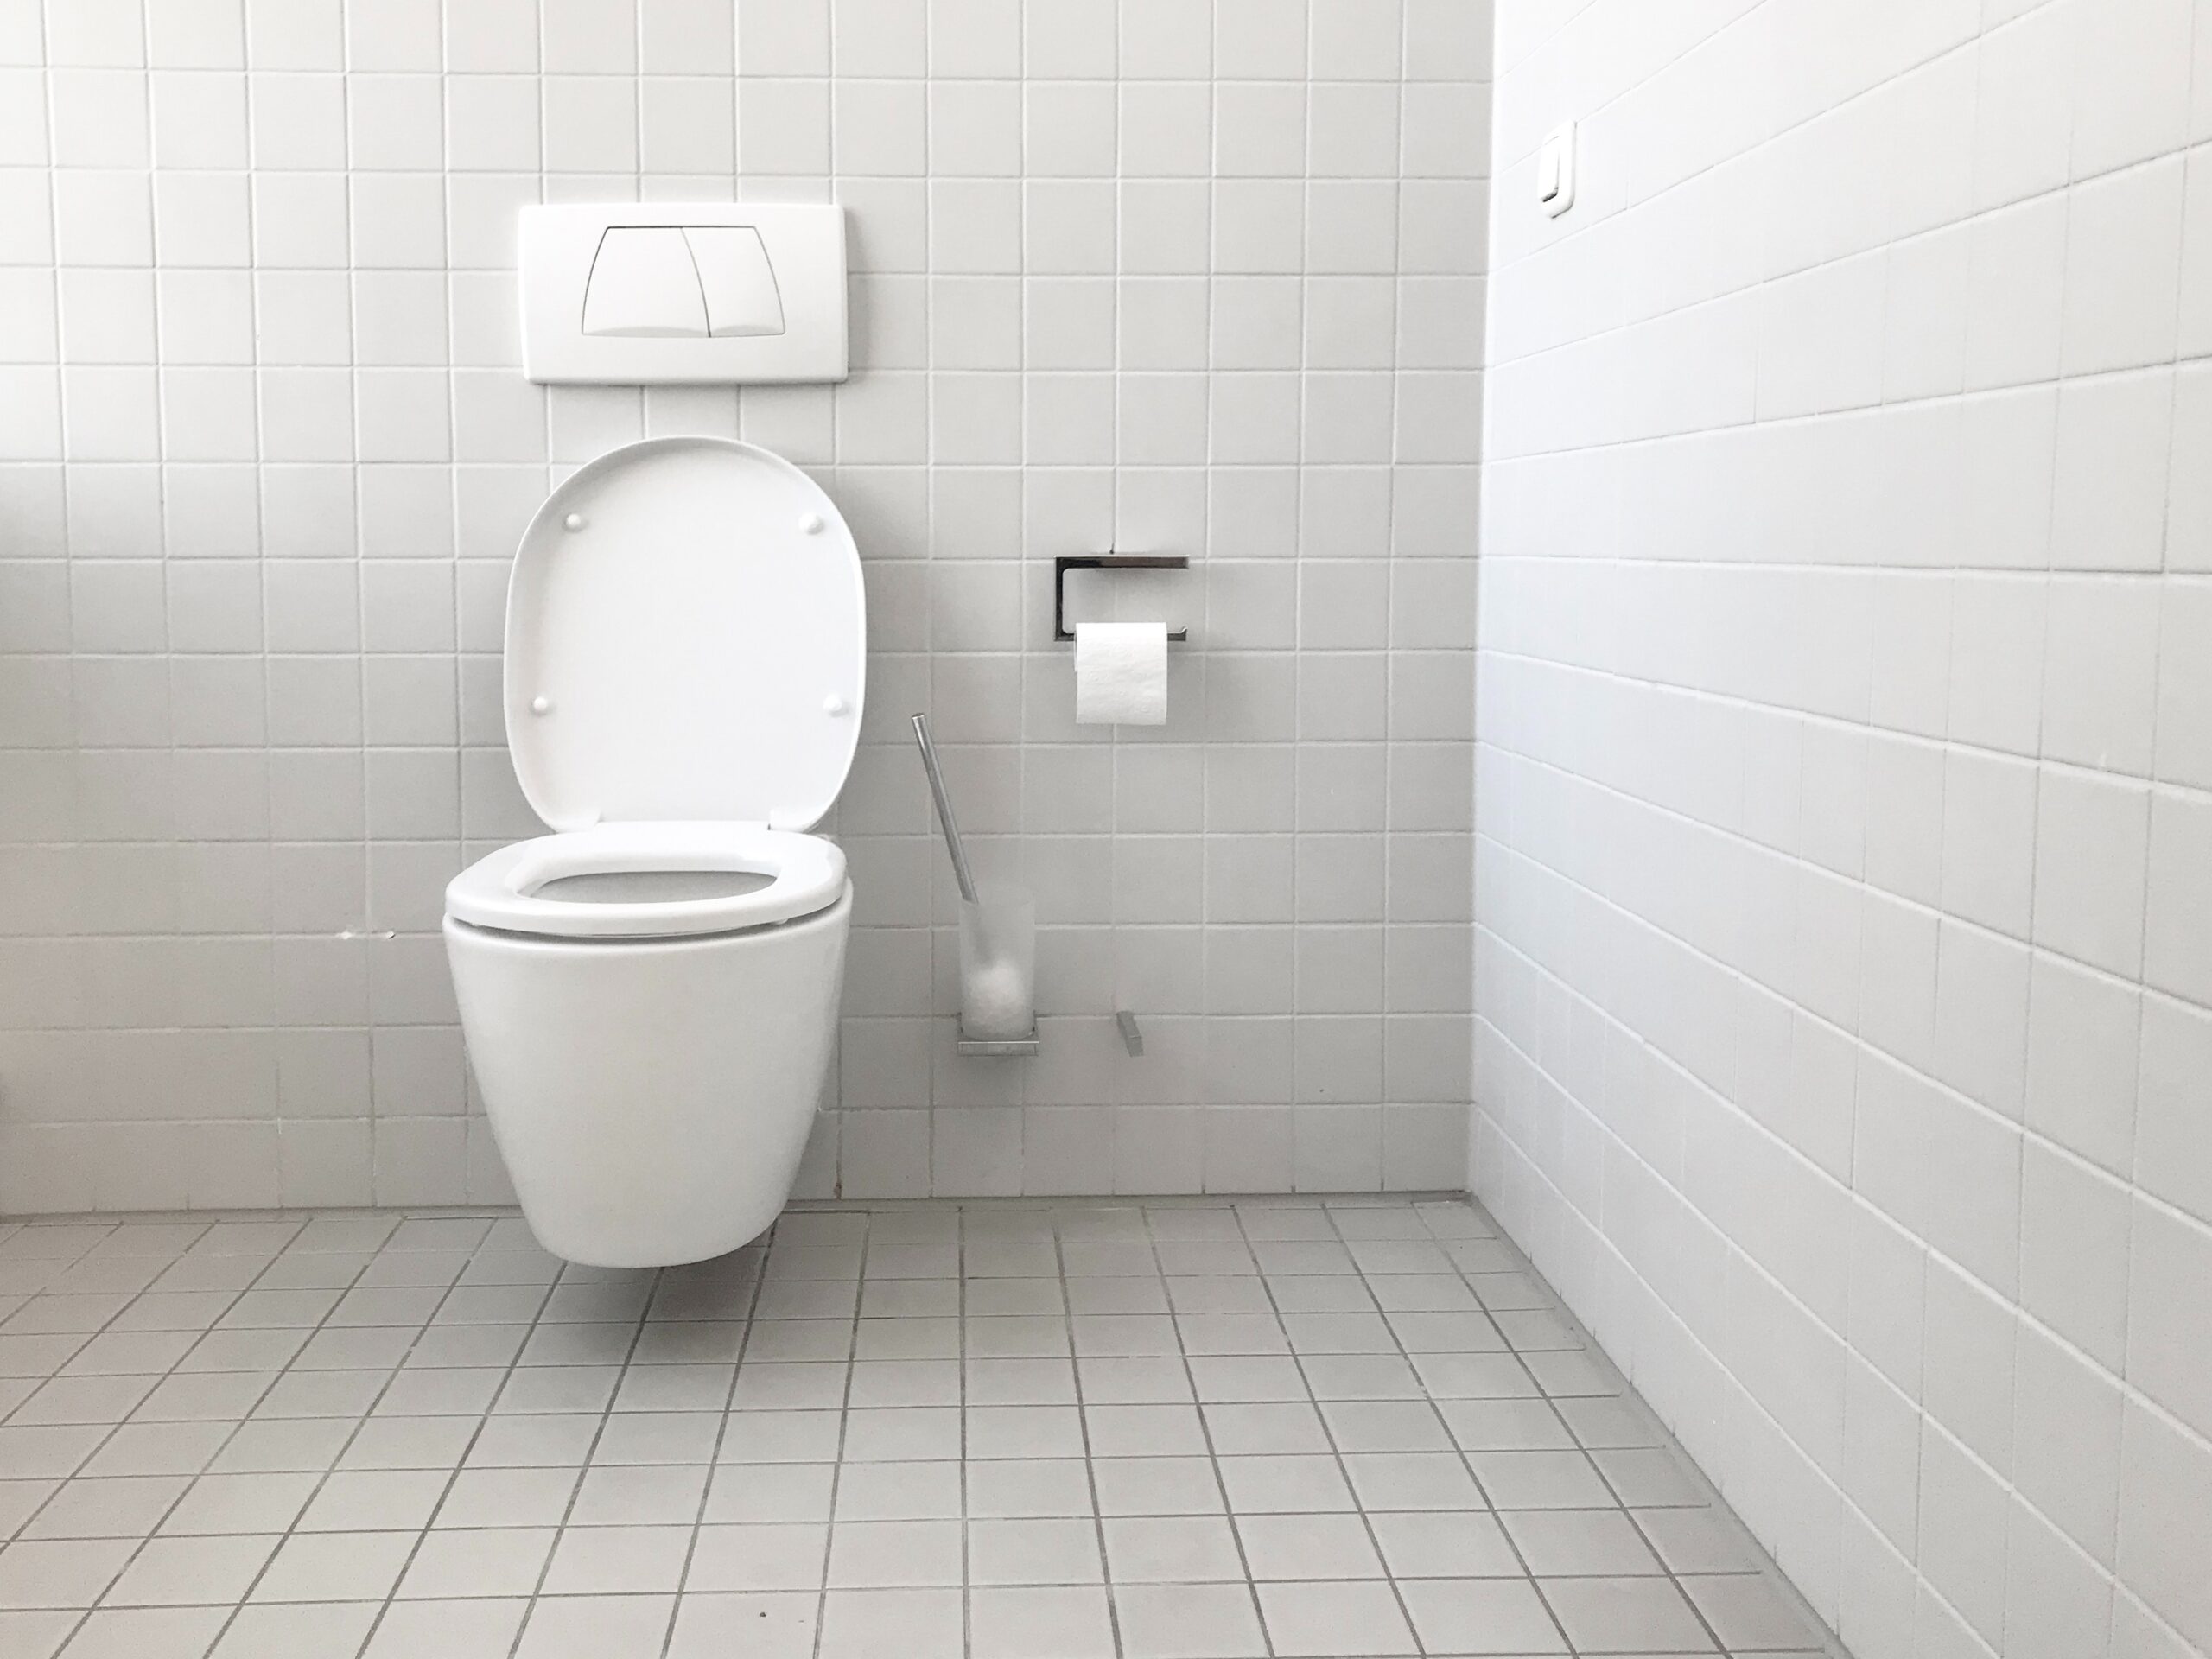 FIVE SIGNS YOUR TOILET NEEDS REPLACING